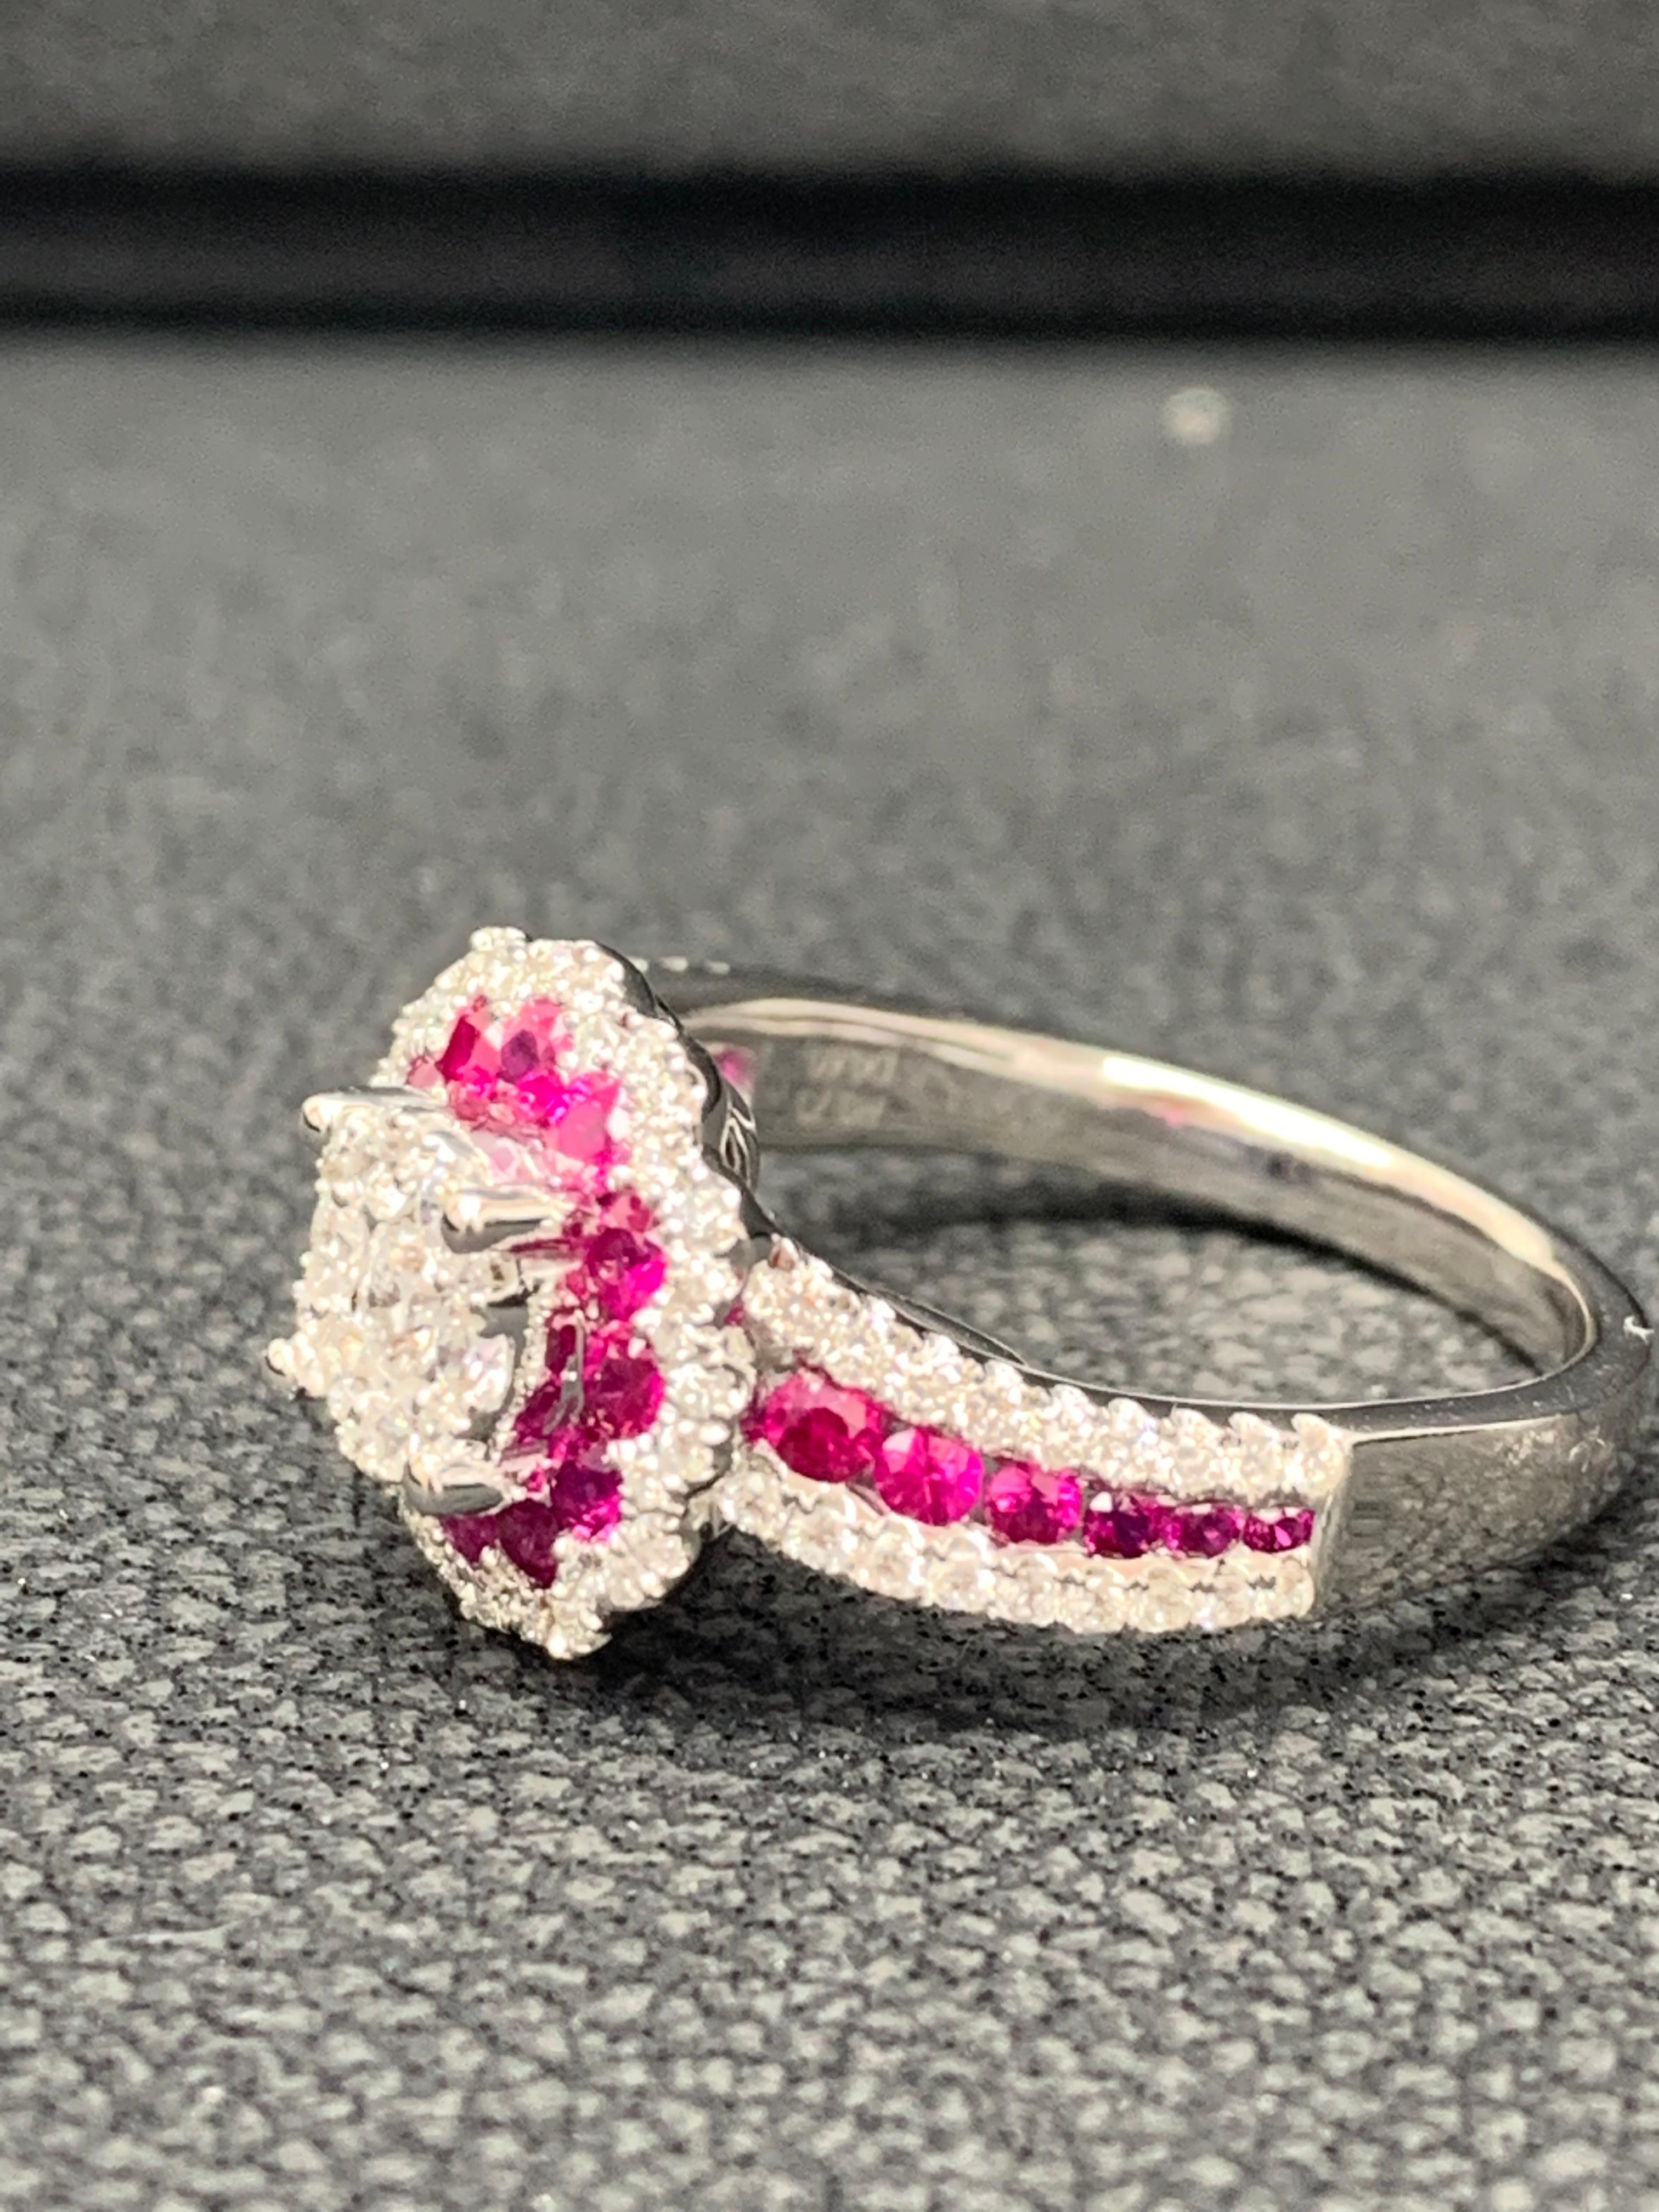 Brilliant Cut 0.73 Carat of Ruby and Diamond Cocktail Ring in 18K White Gold For Sale